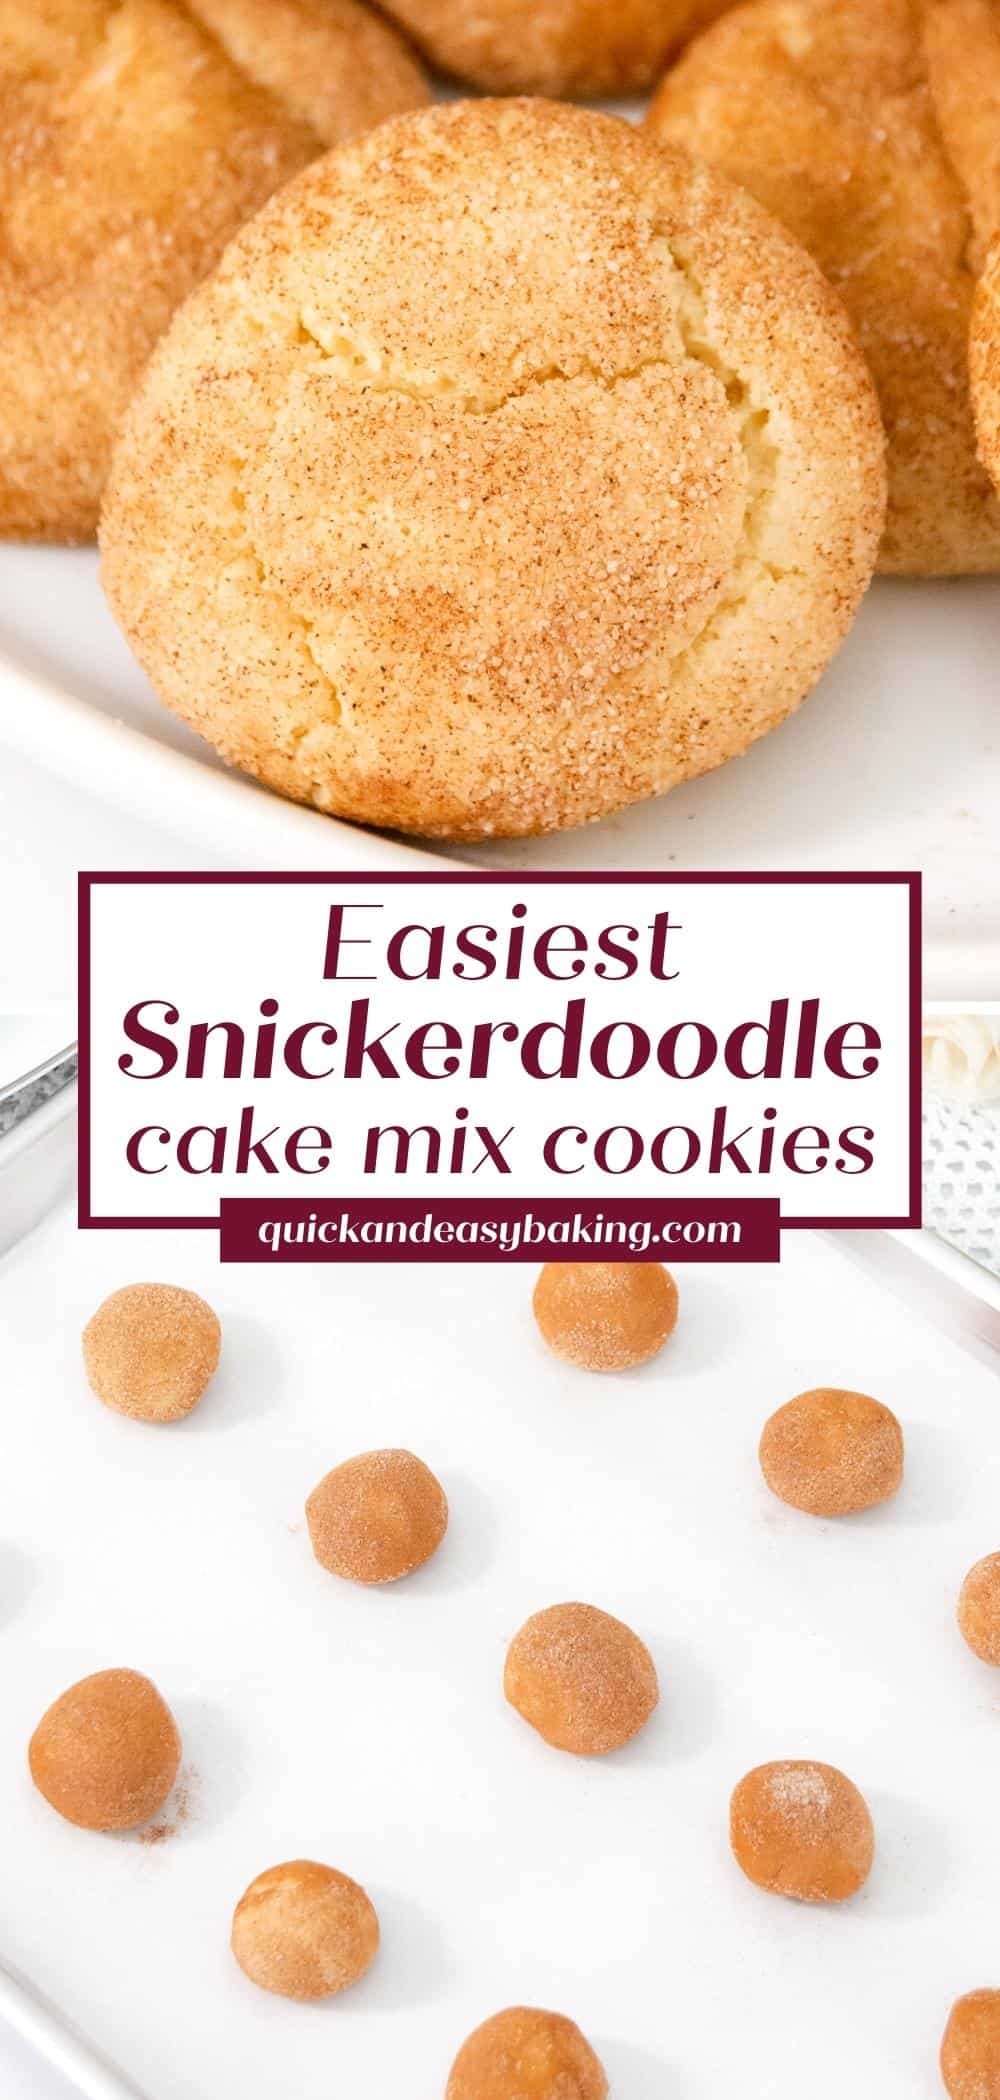 Graphic collage of snickerdoodle cookies with text pin.